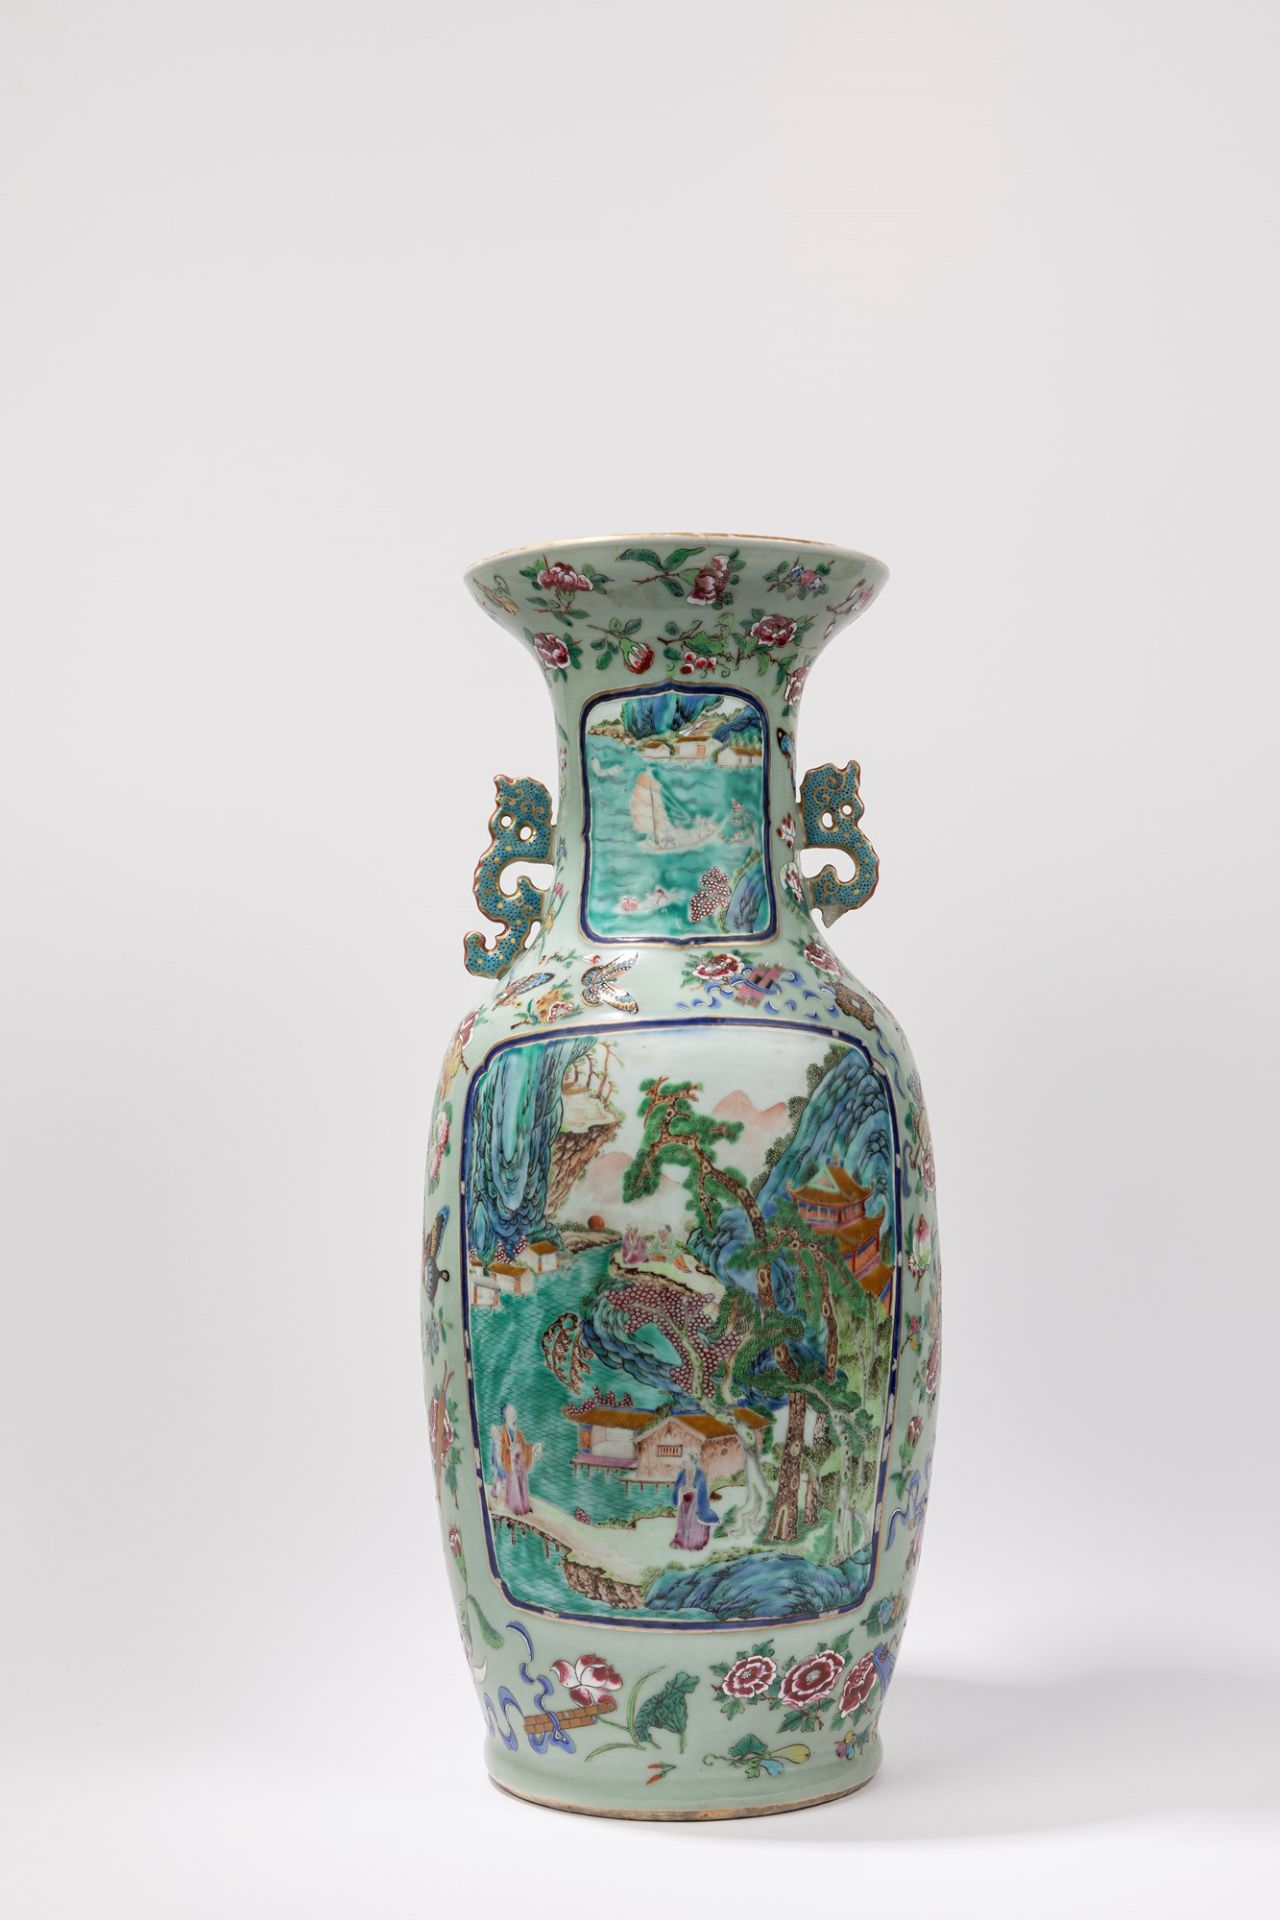 A FAMILLE ROSE PORCELAIN VASE, China, Qing dynasty, 19th century